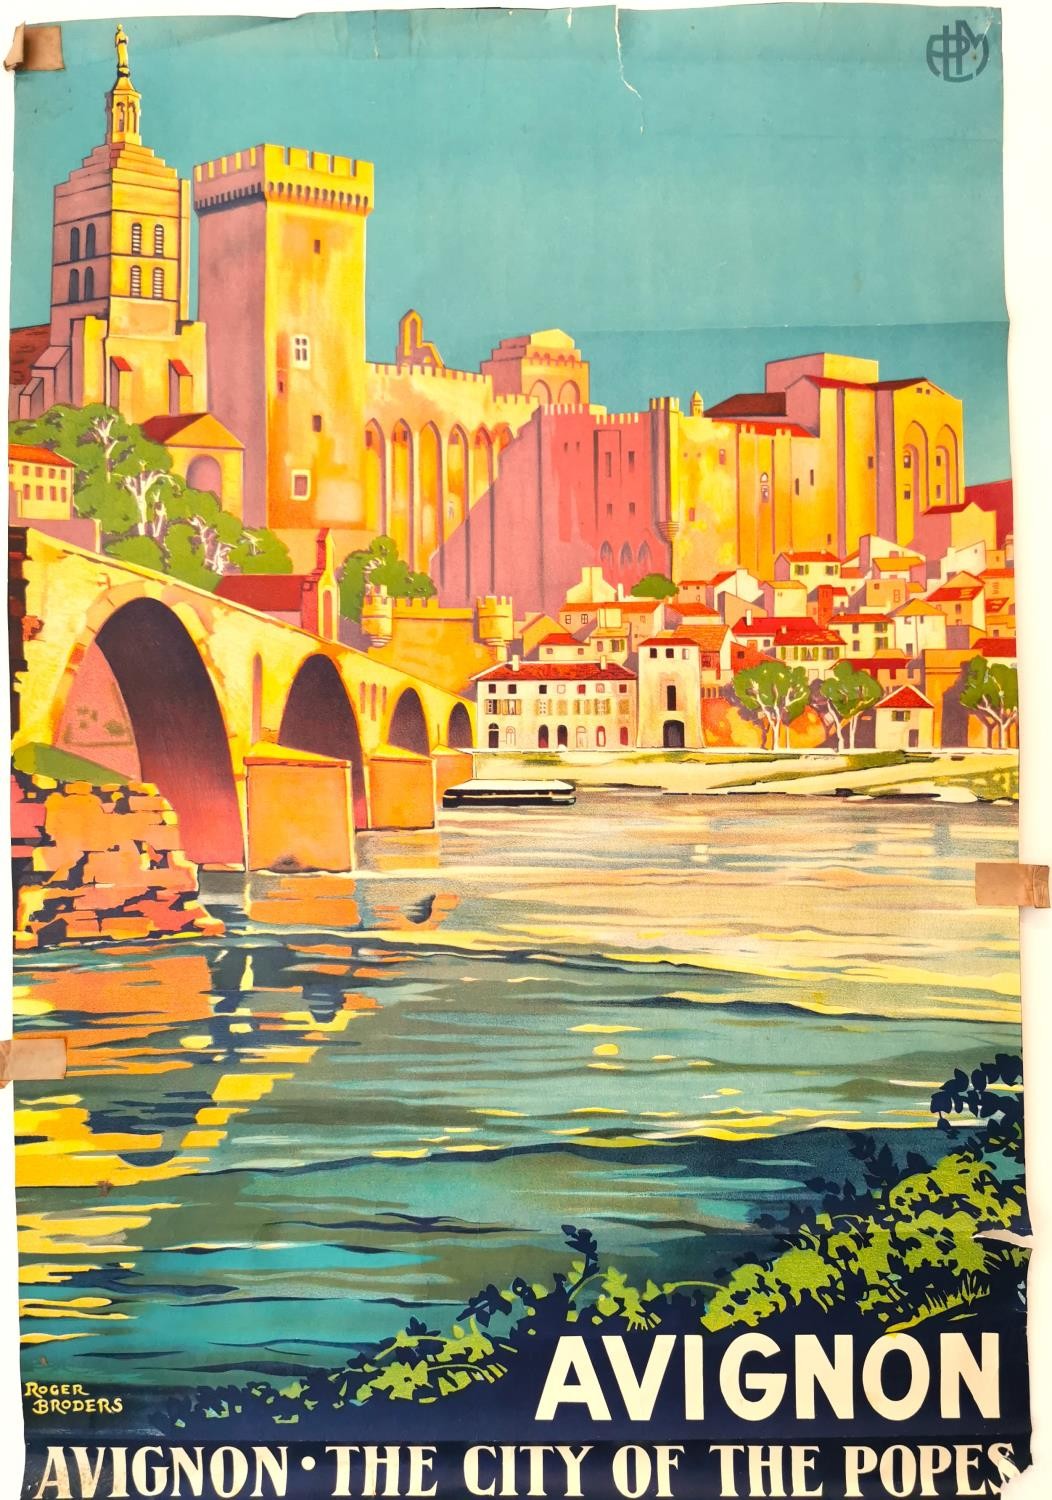 Roger Broders (1883-1953) Avignon, The City of Popes lithographic poster, 1921. H.90 W.60cm - Image 2 of 10